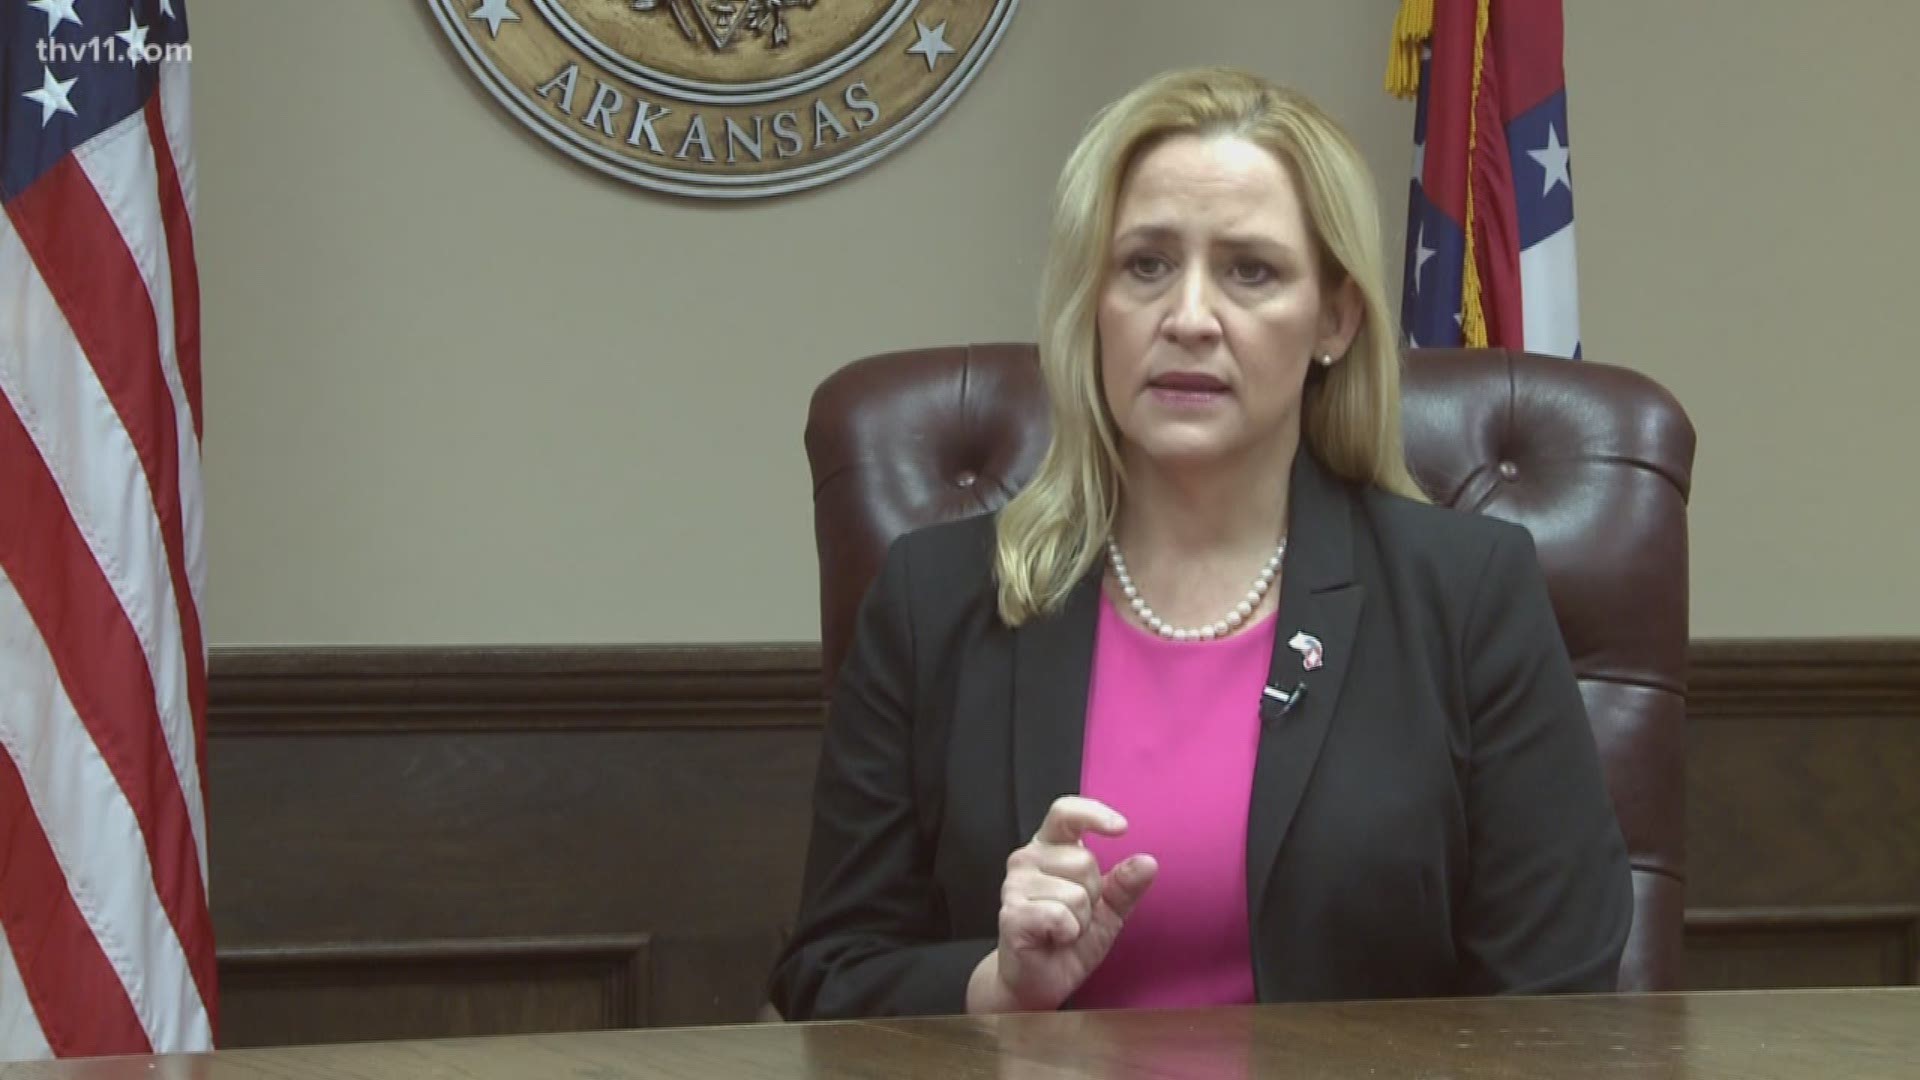 Arkansas Attorney General Leslie Rutledge said she will work with the Diocese of Little Rock to investigate accusations of abuse by the state's Catholic churches.